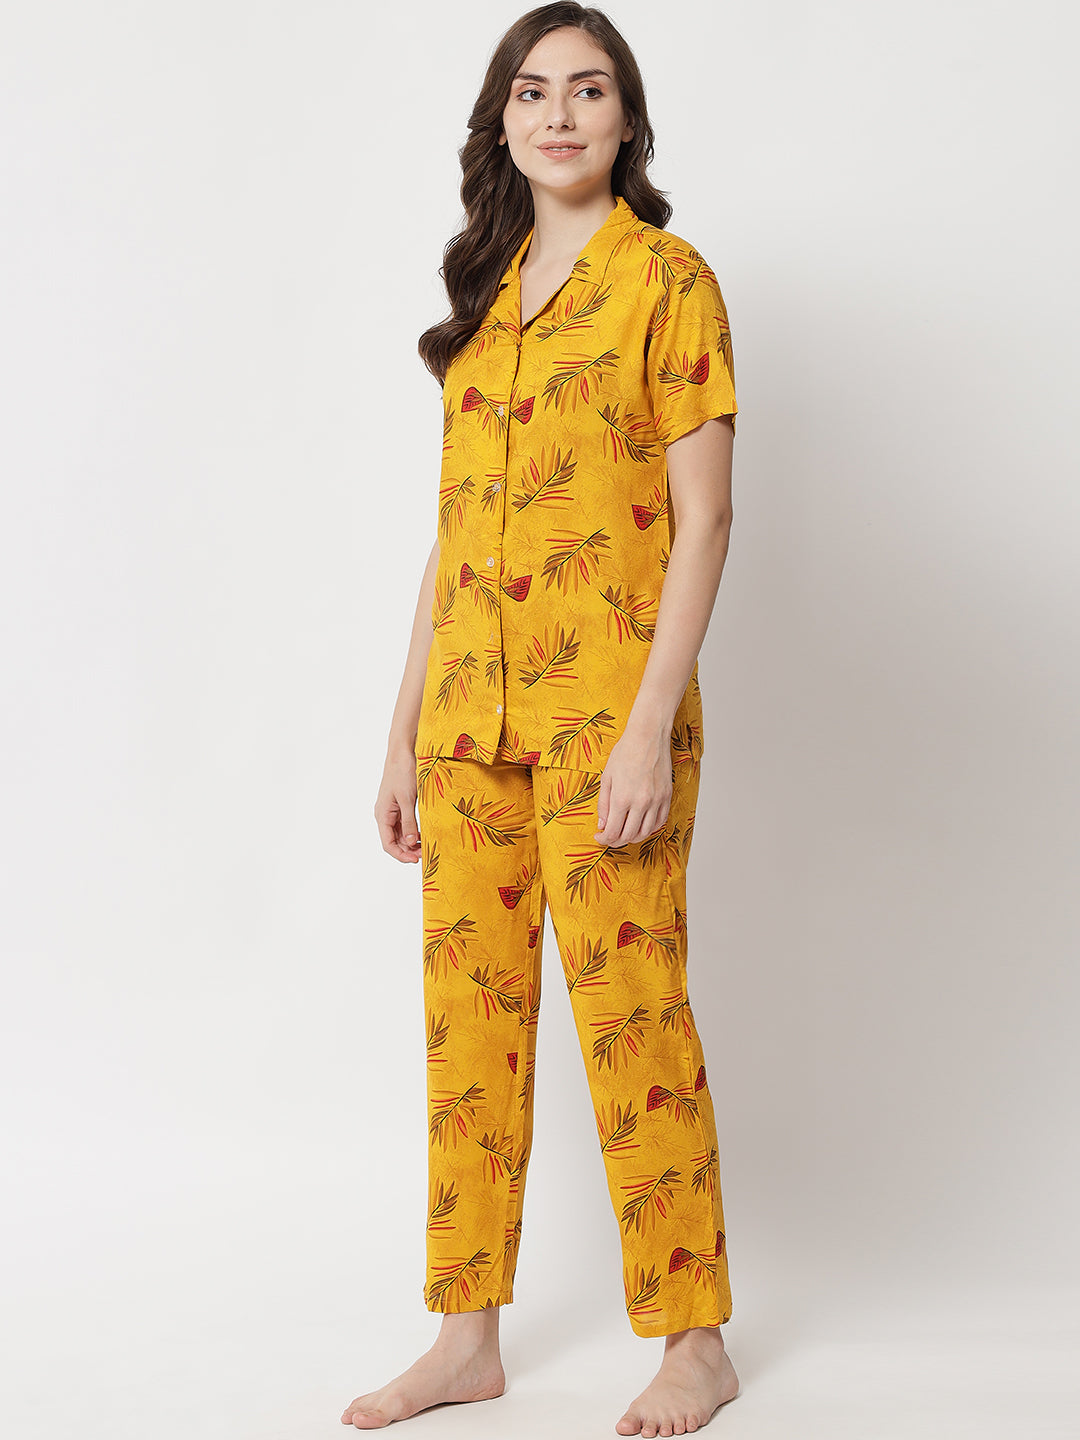 printed-button-down-nightsuit-for-women-n75y0